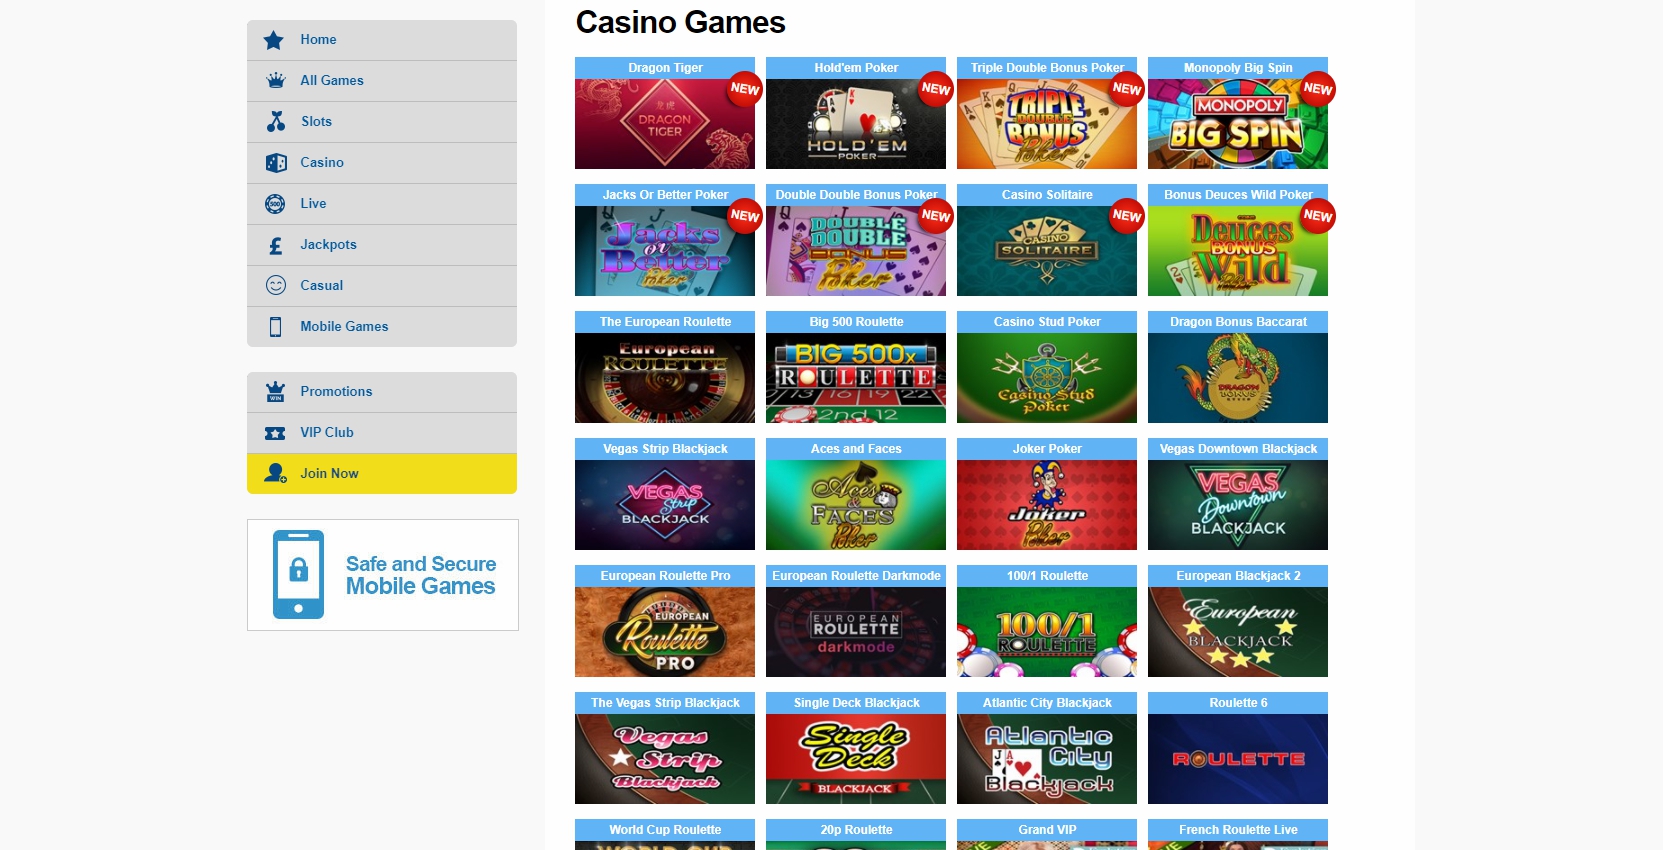 National Lottery Casino Games